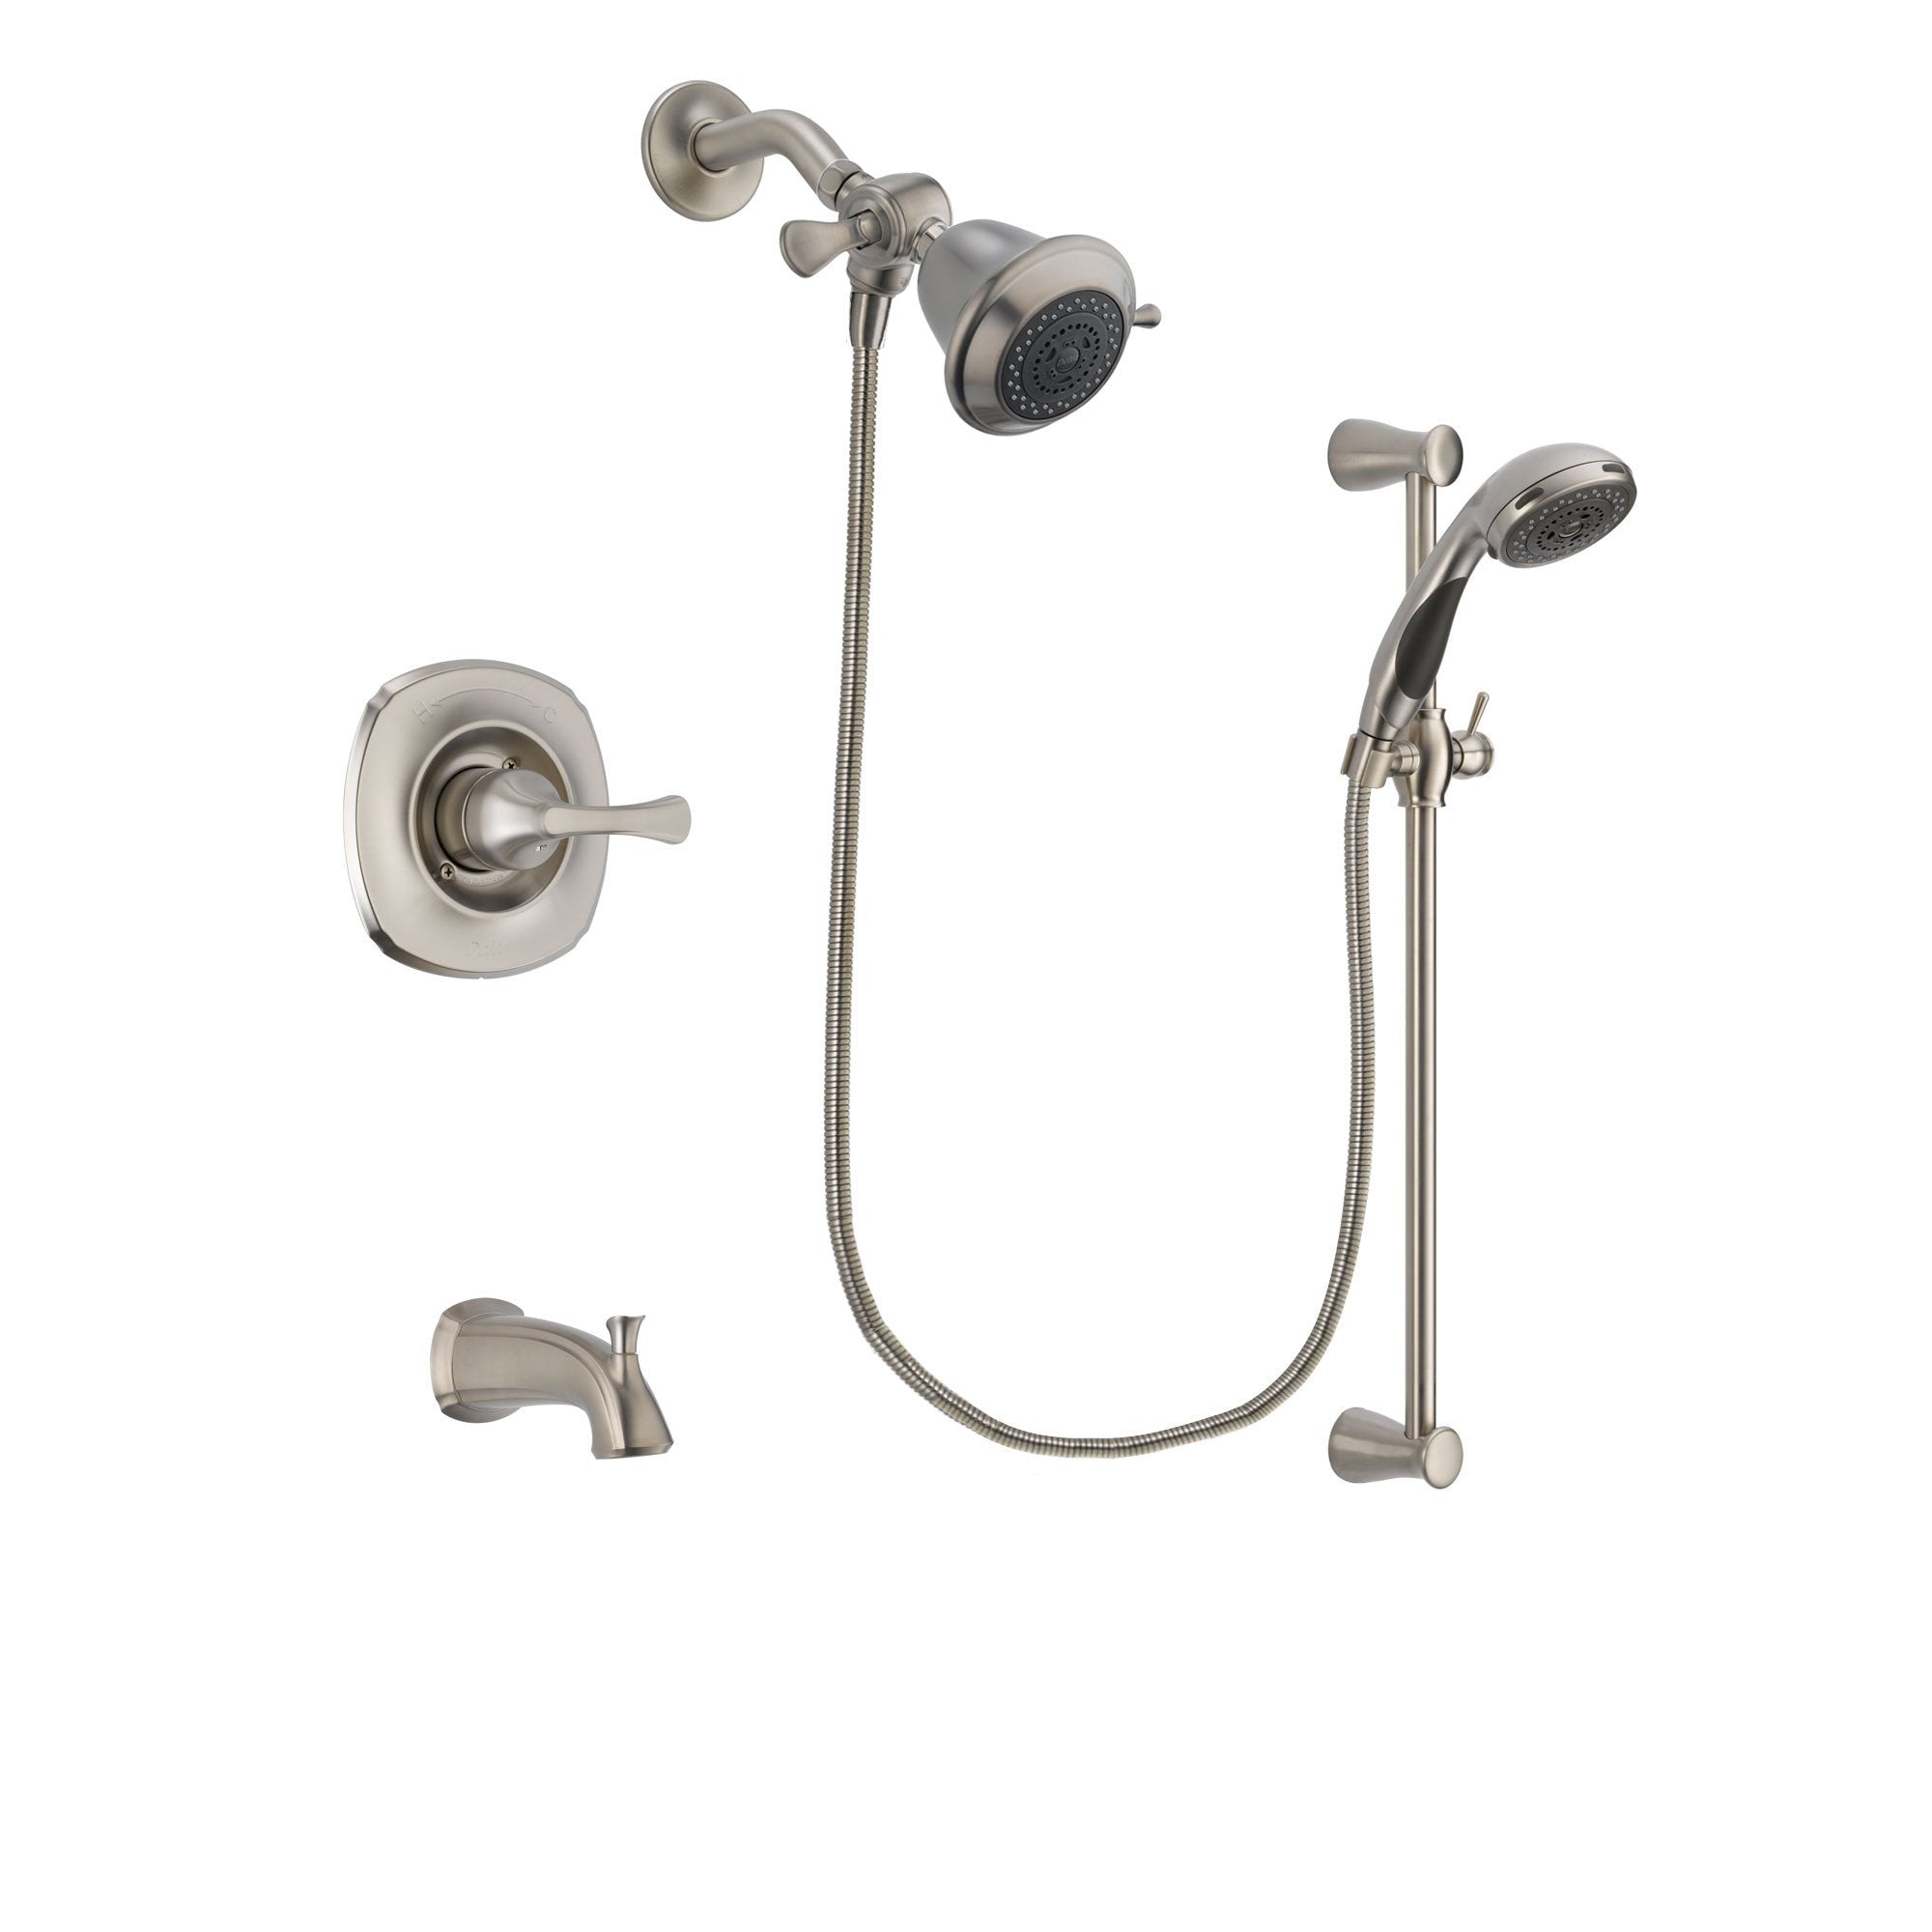 Delta Addison Stainless Steel Finish Tub and Shower Faucet System Package with Shower Head and Handheld Shower Spray with Slide Bar Includes Rough-in Valve and Tub Spout DSP1529V